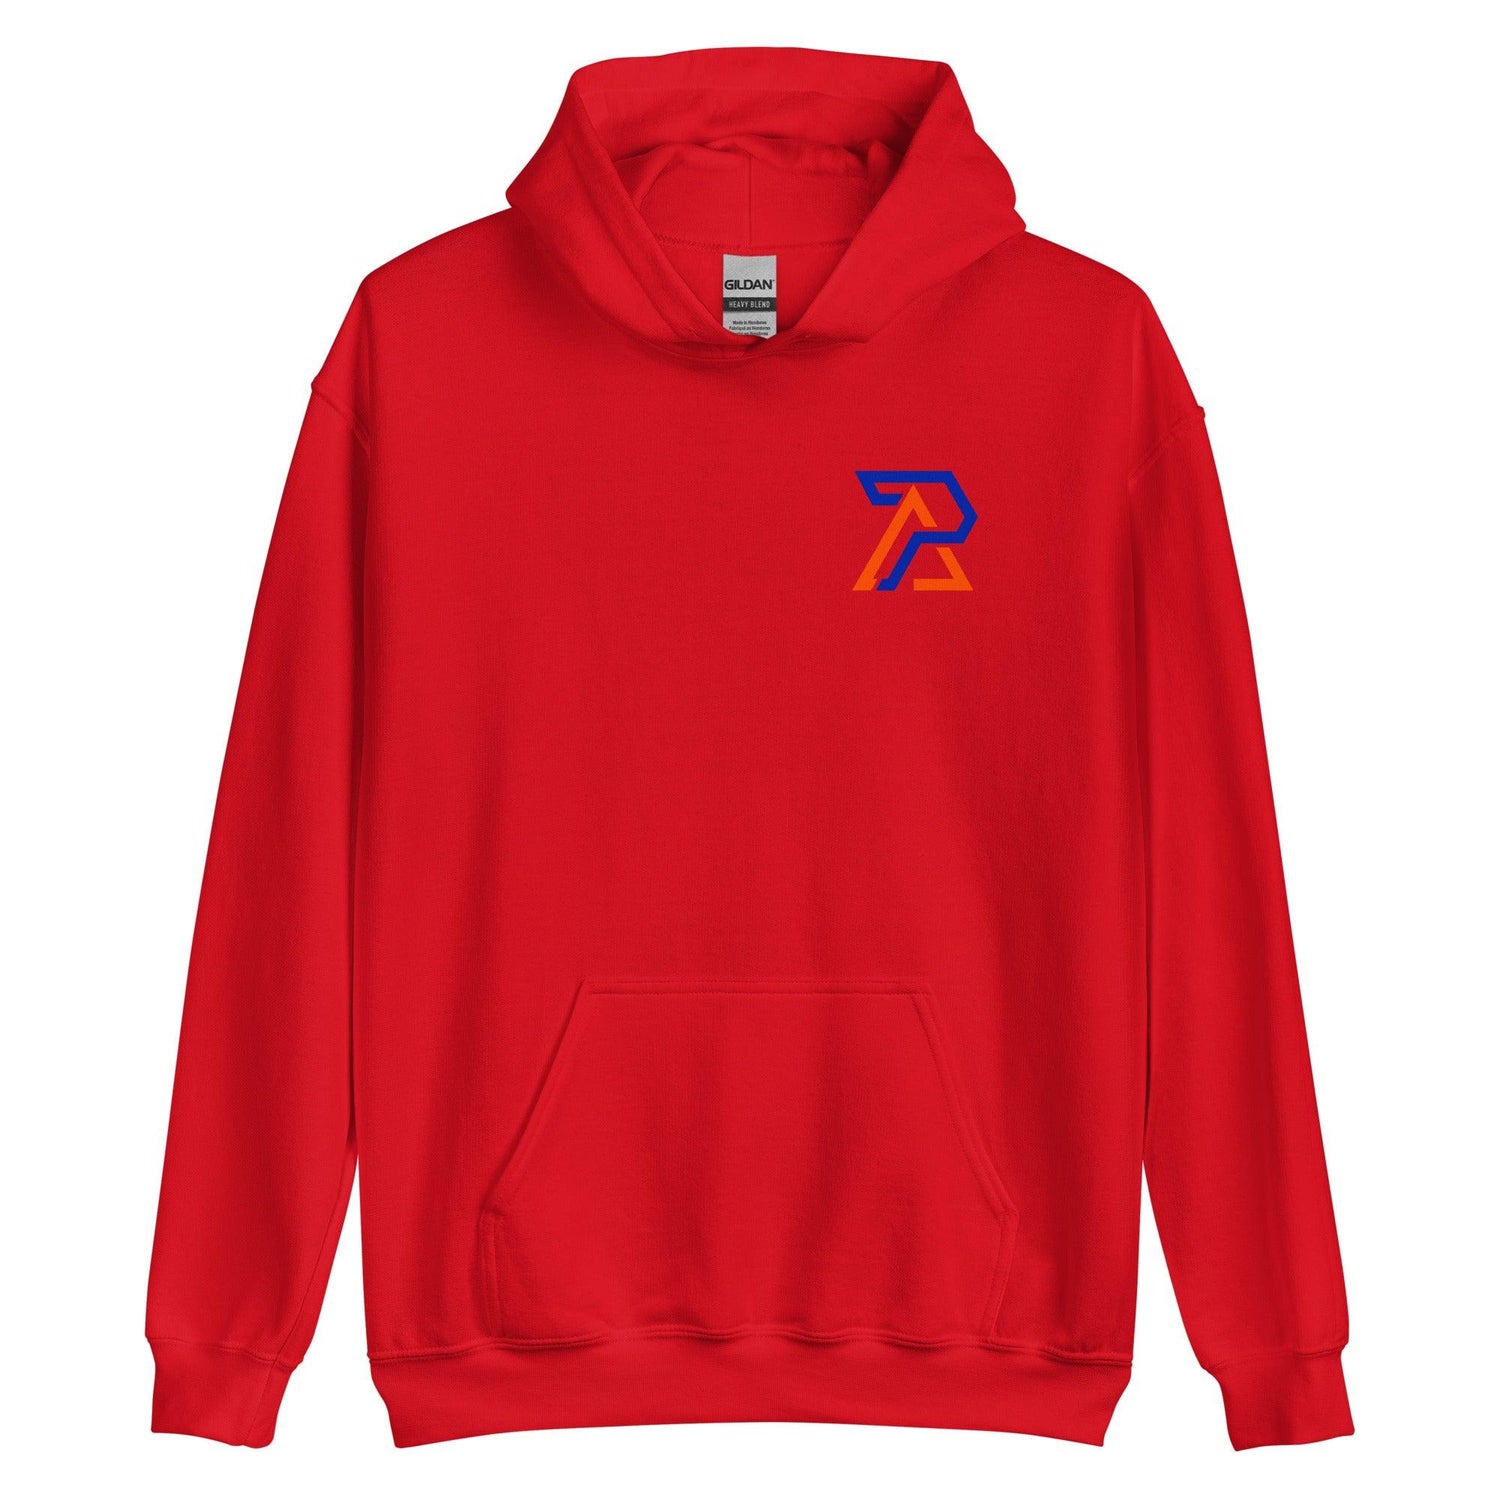 Philip Abner “Signature” Hoodie - Fan Arch